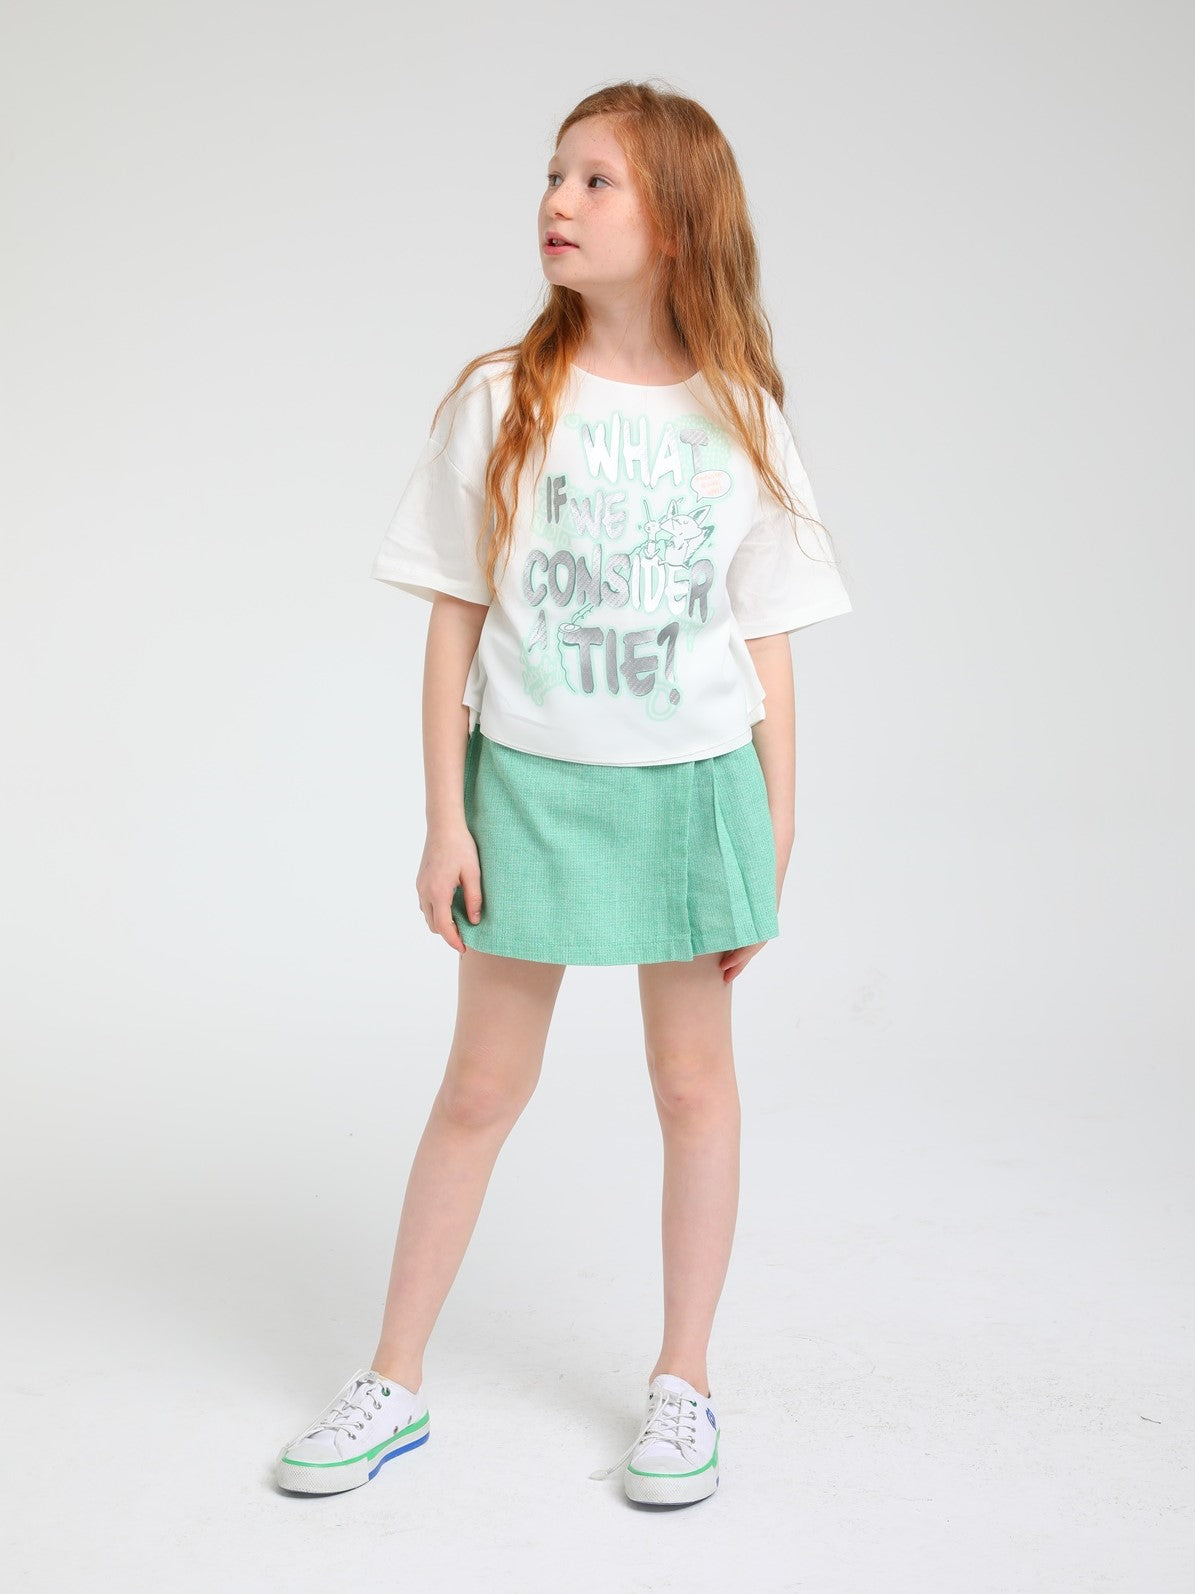 White Top Mint Printed With Matching Skort